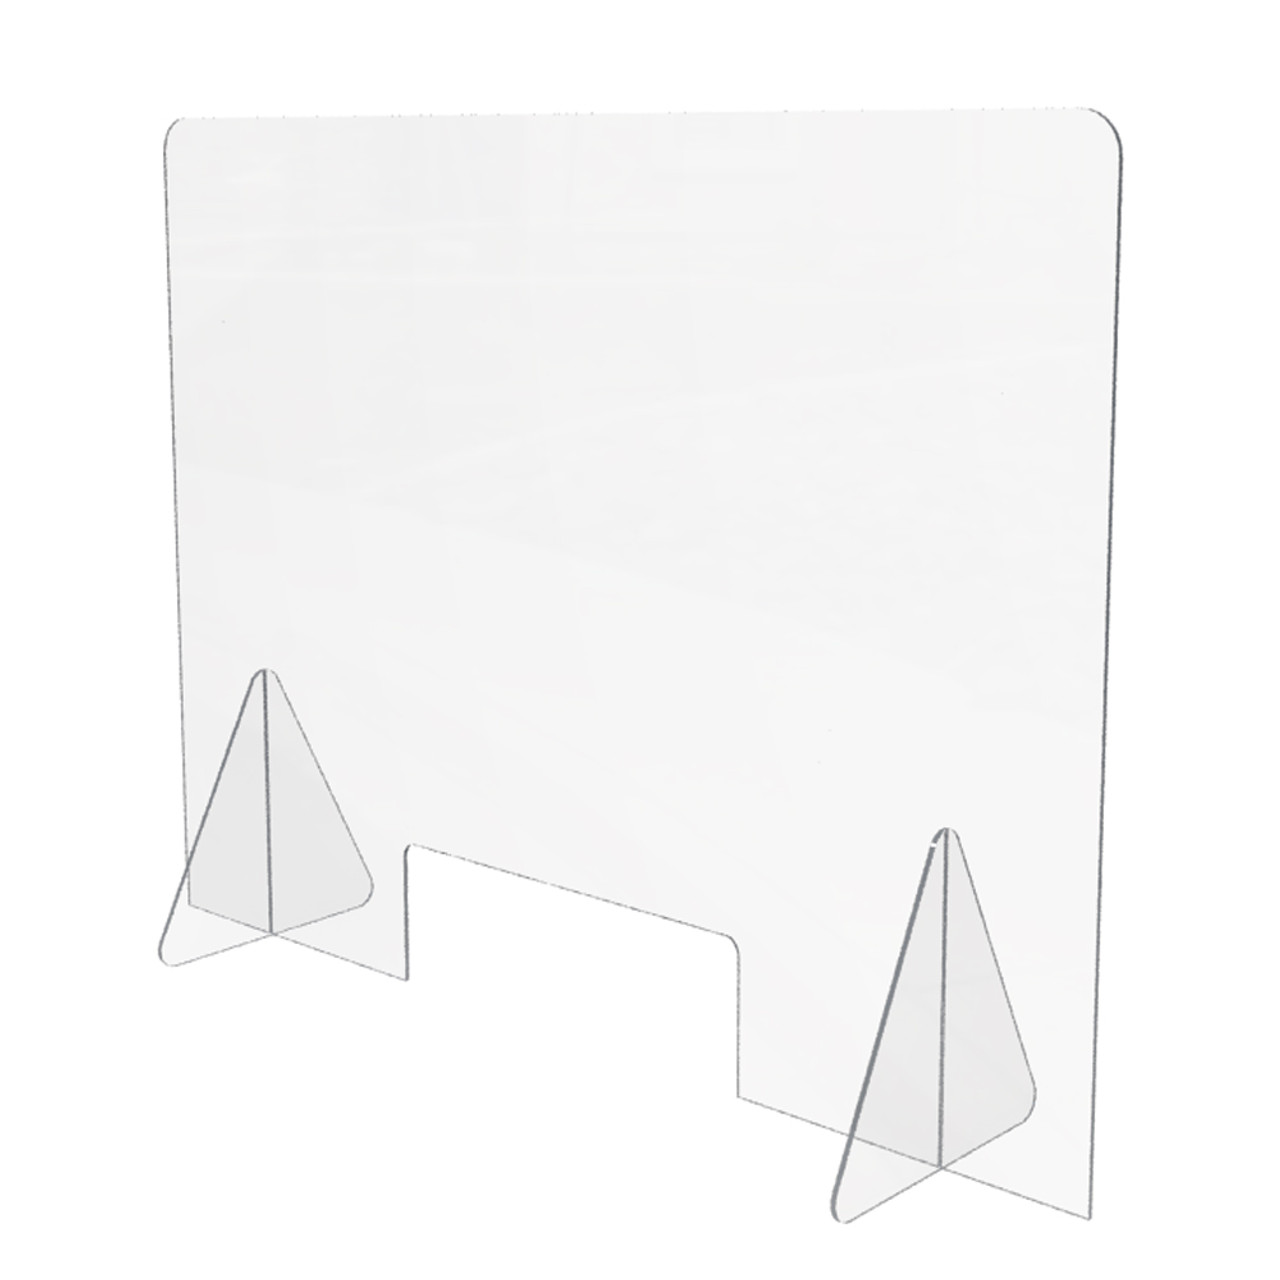  Clear Acrylic Panel  Free-standing Sneeze Guards for